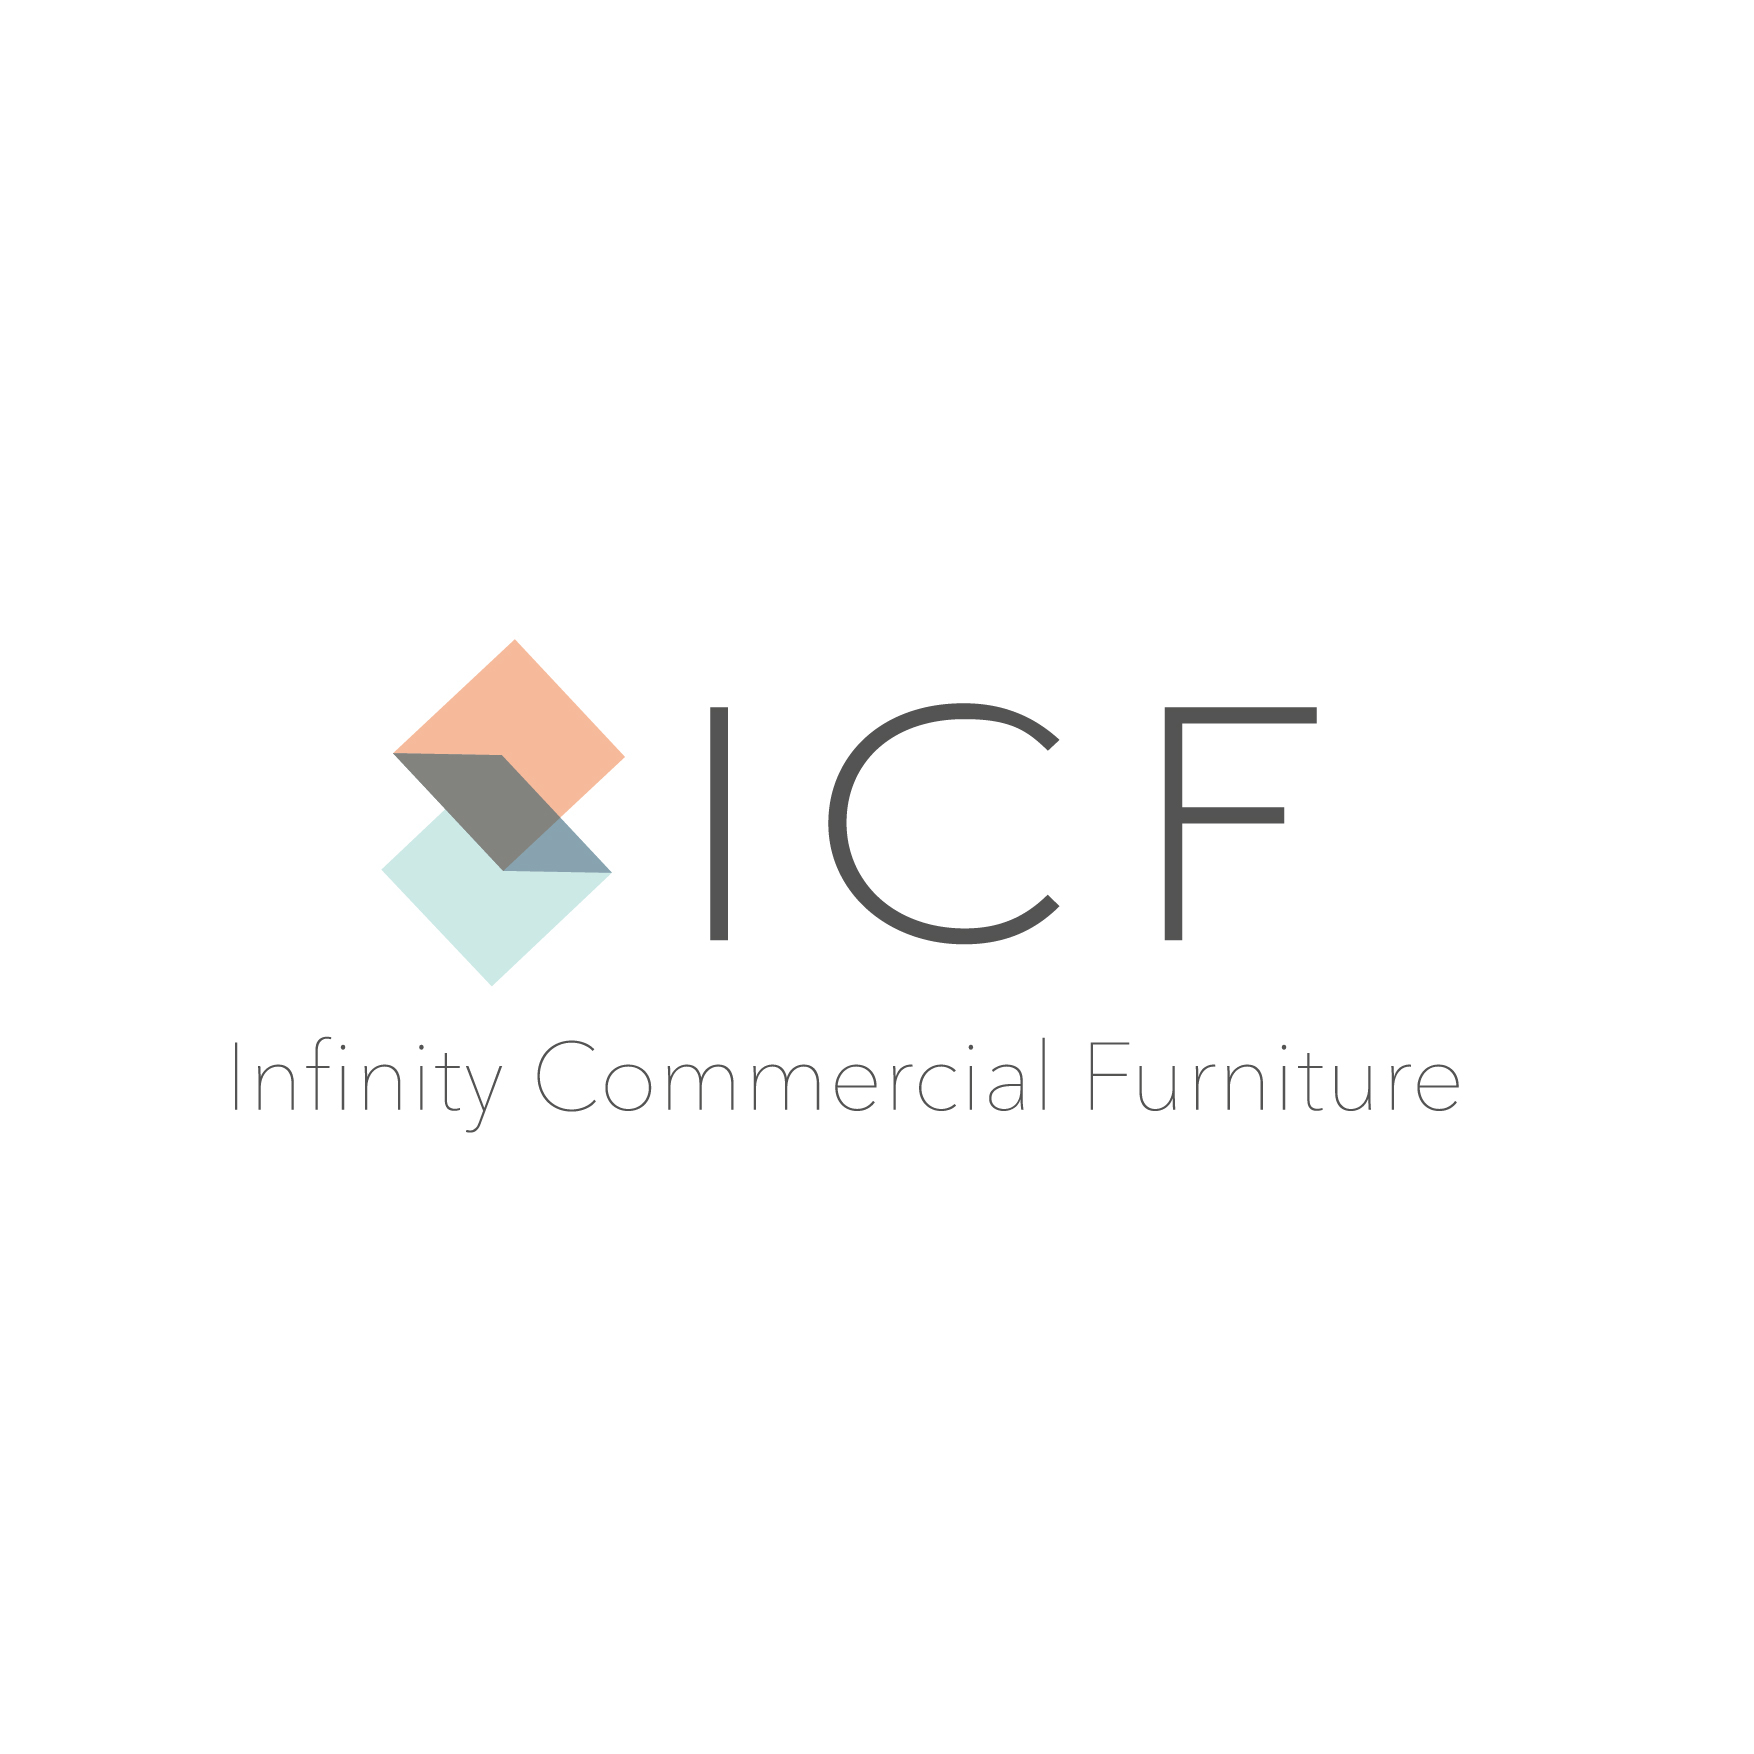 Infinity Commercial Furniture